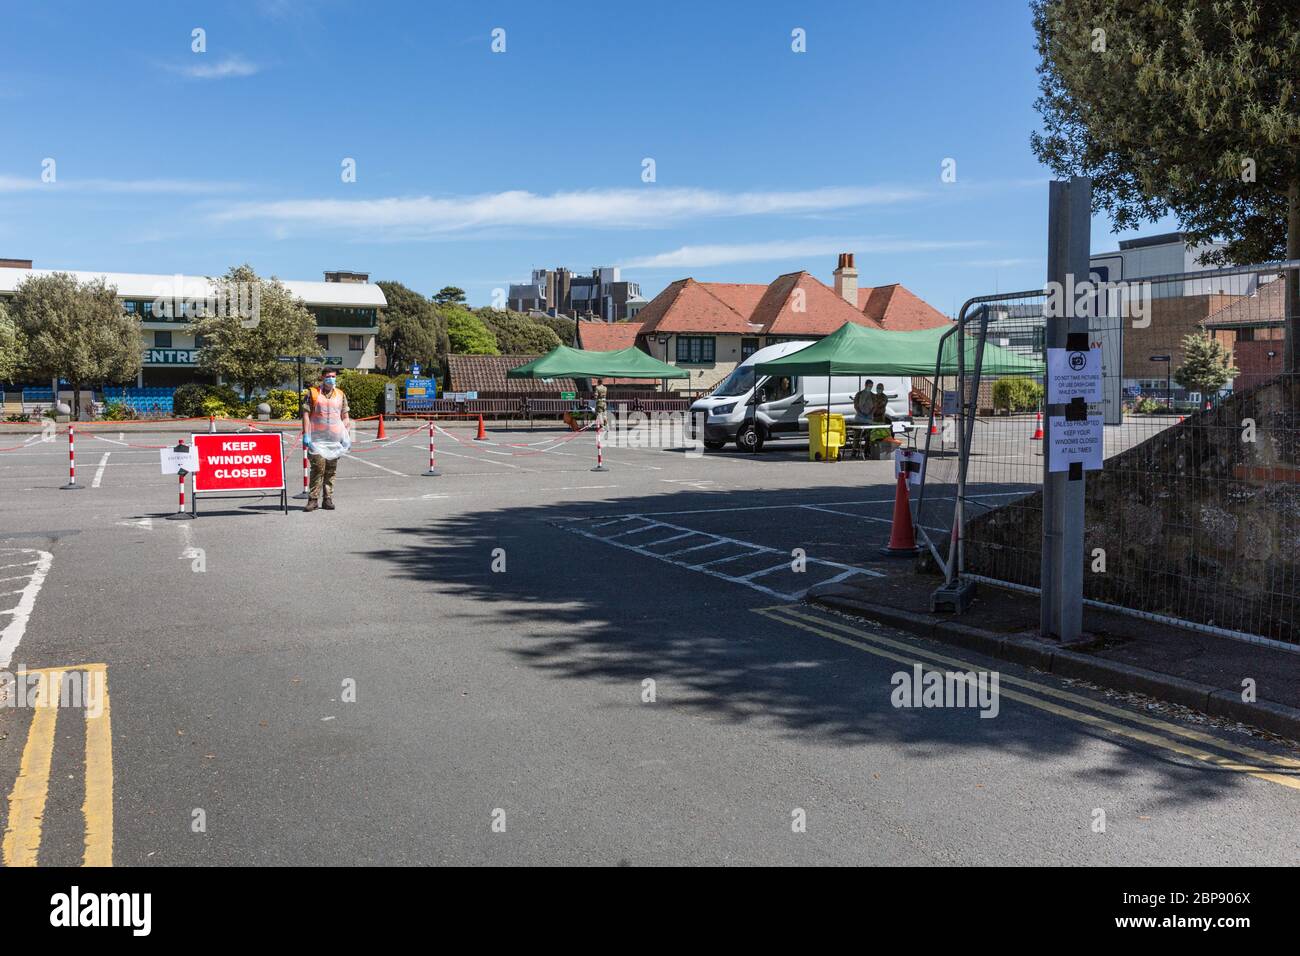 Eastbourne, England. 18 May 2020. Army set up a mobile Covid testing centre in College Road car park, but it remains empty. Credit: Antony Meadley/Alamy Live News Stock Photo